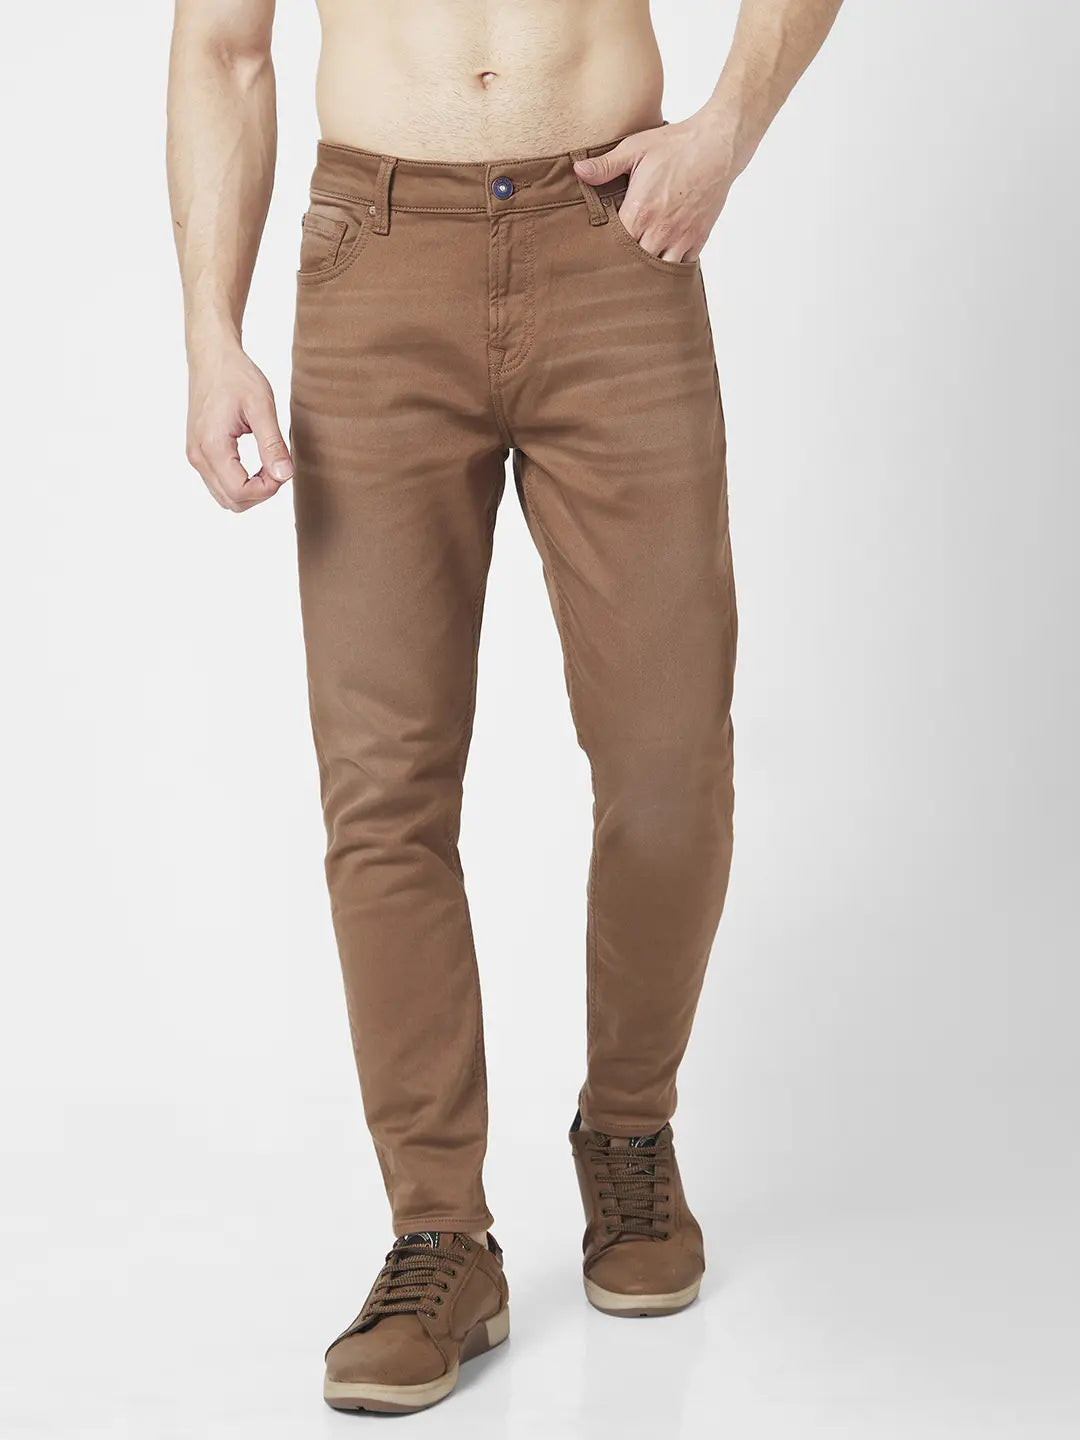 Spykar Men Coffee Brown Cotton Stretch Slim Fit Tapered Length Clean Look Mid Rise Jeans (Kano)